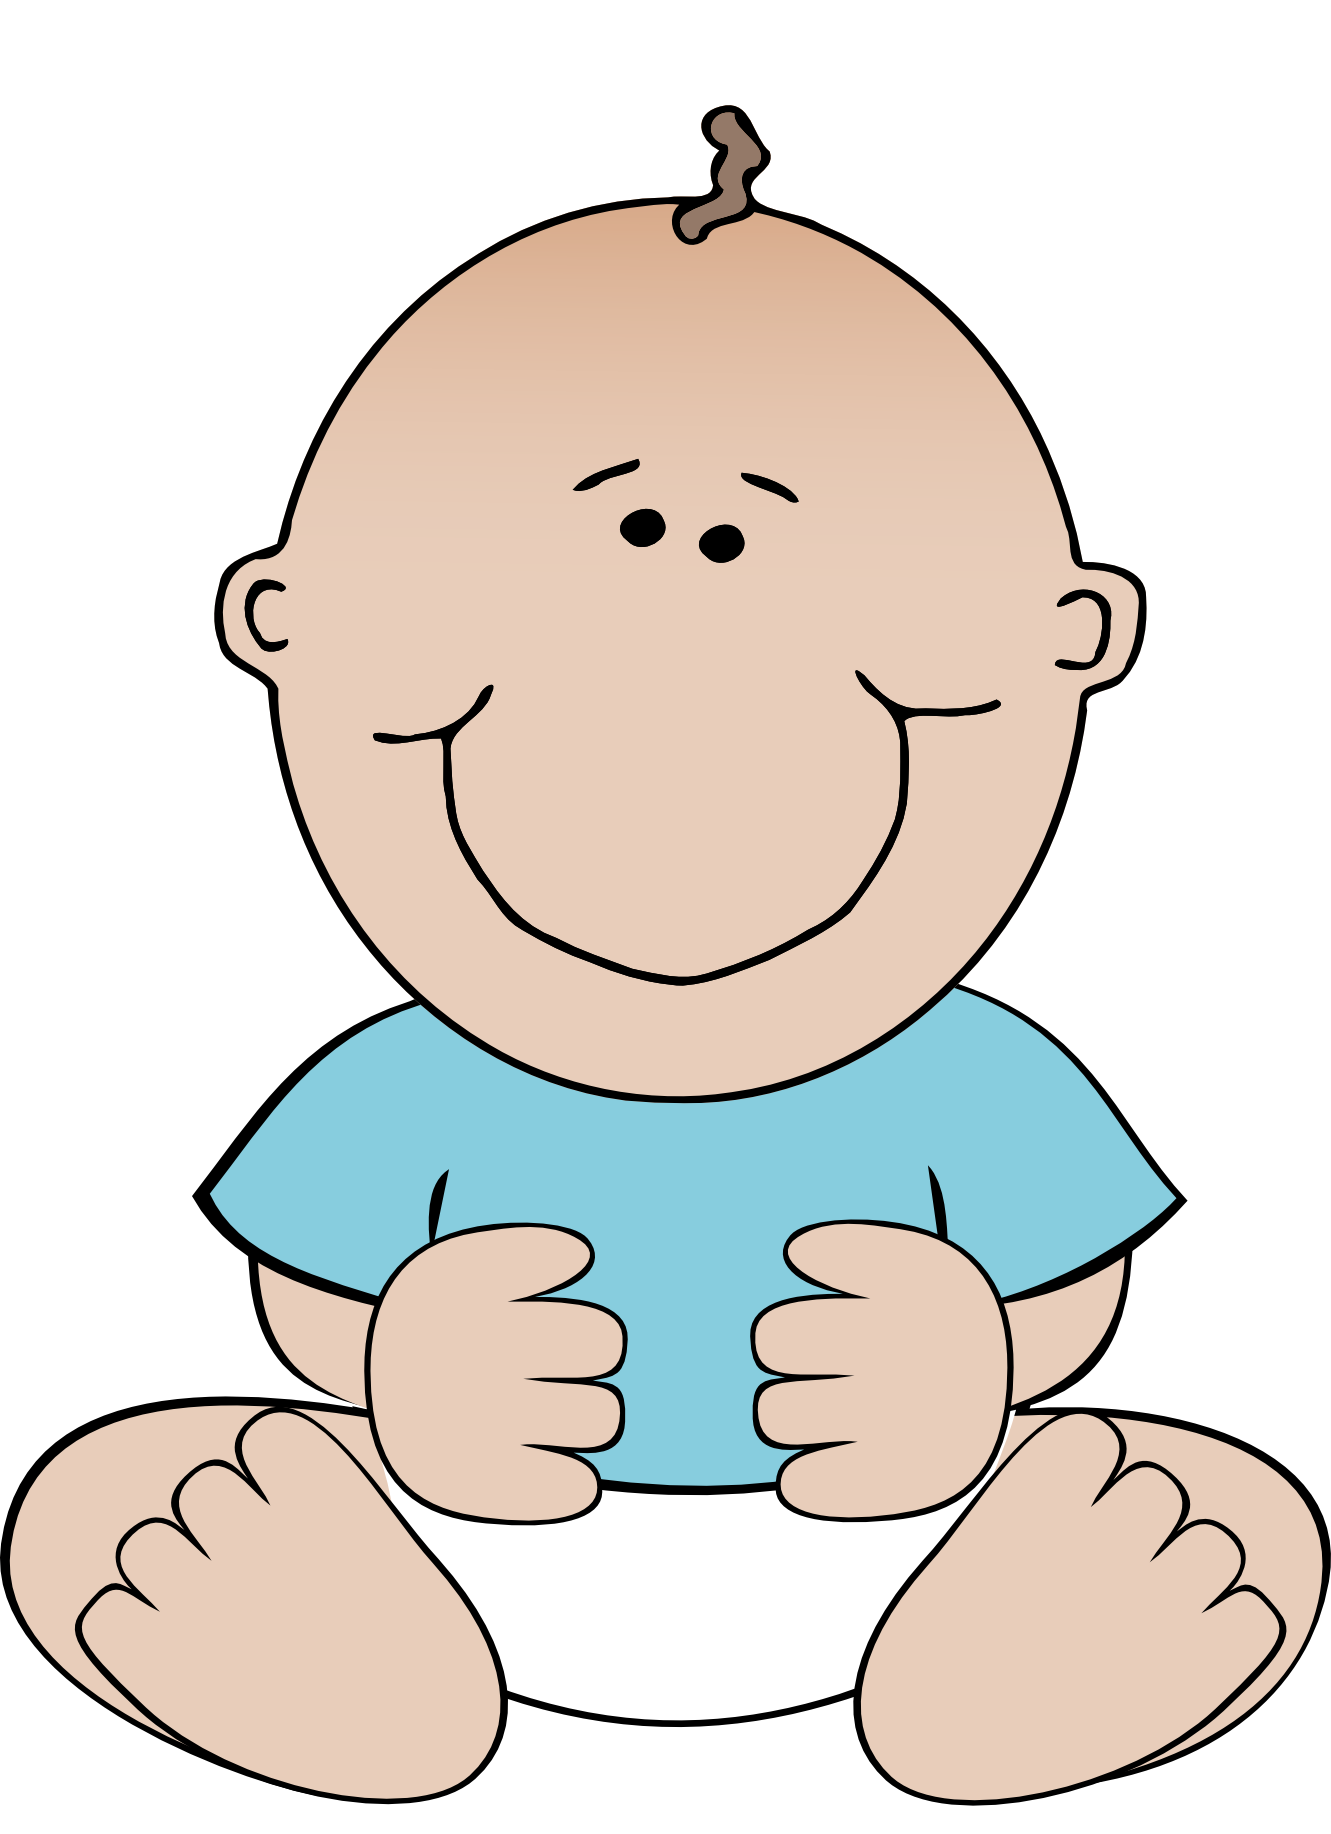 clipart baby related - photo #37